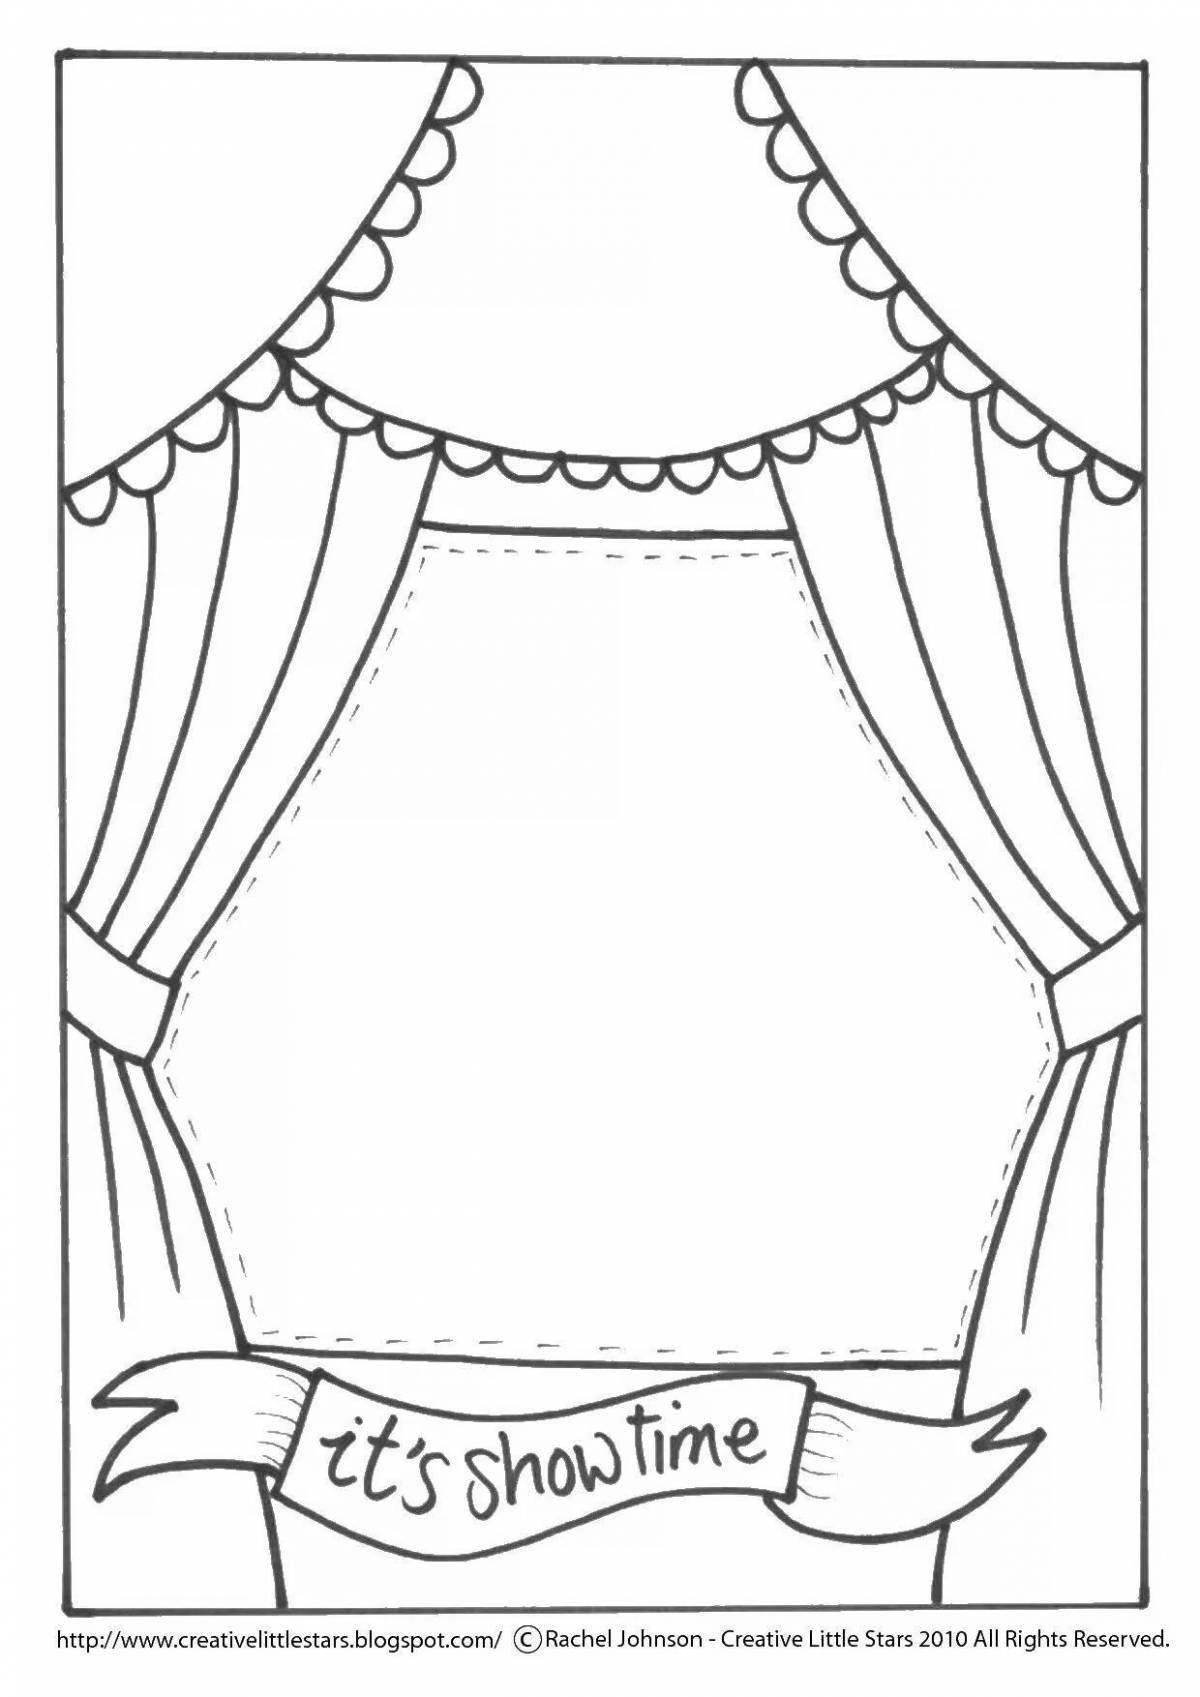 Coloring page festive theater stage